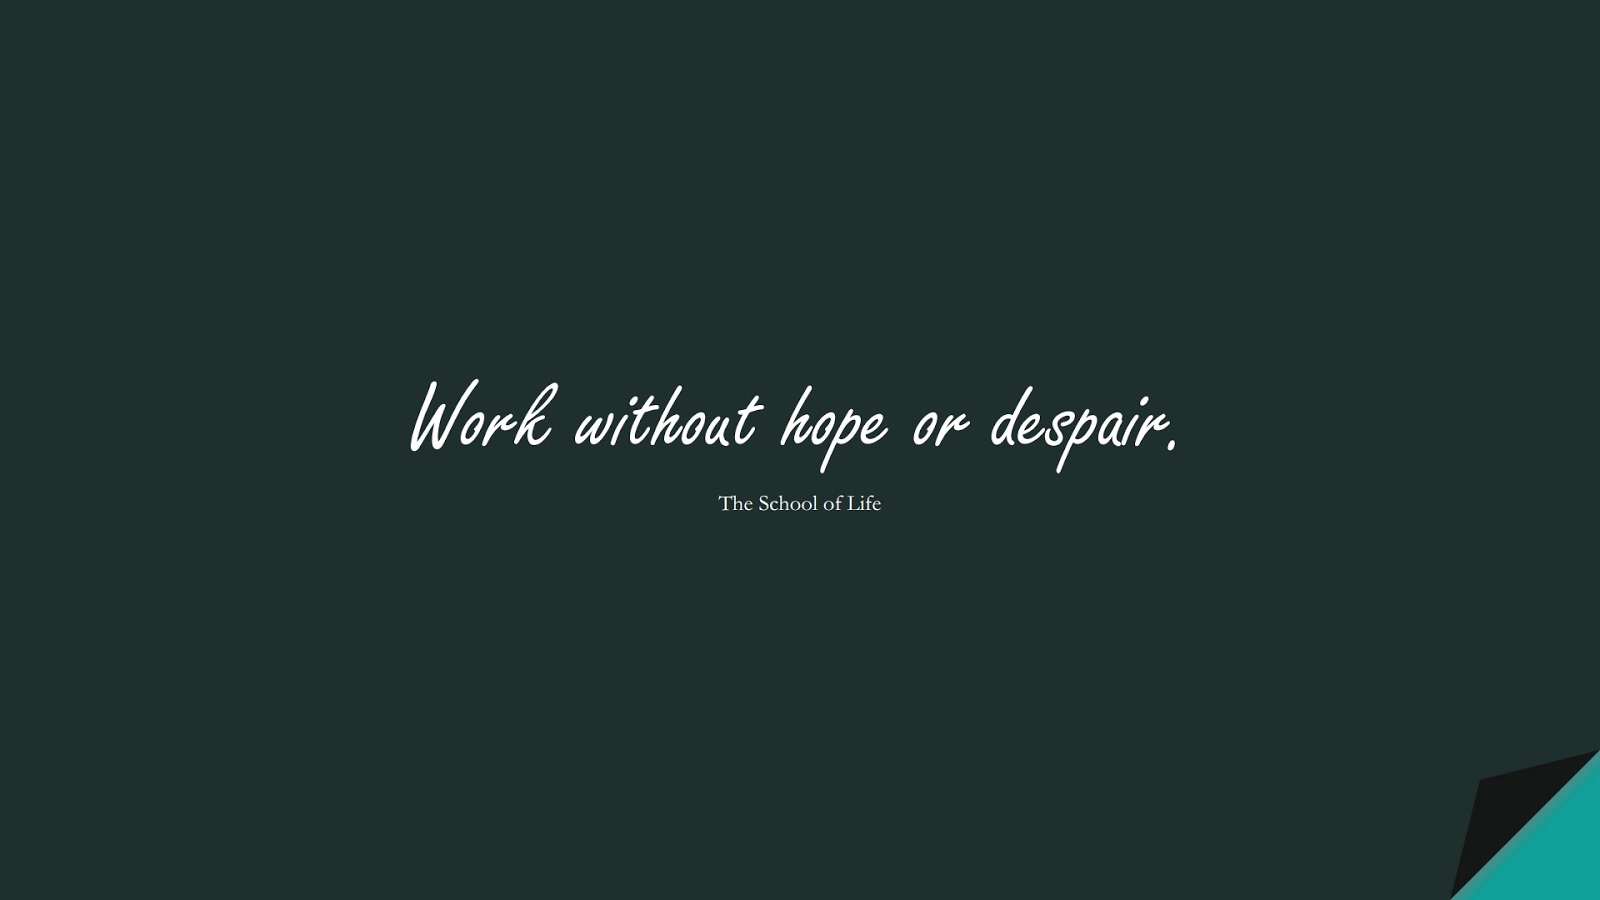 Work without hope or despair. (The School of Life);  #EncouragingQuotes